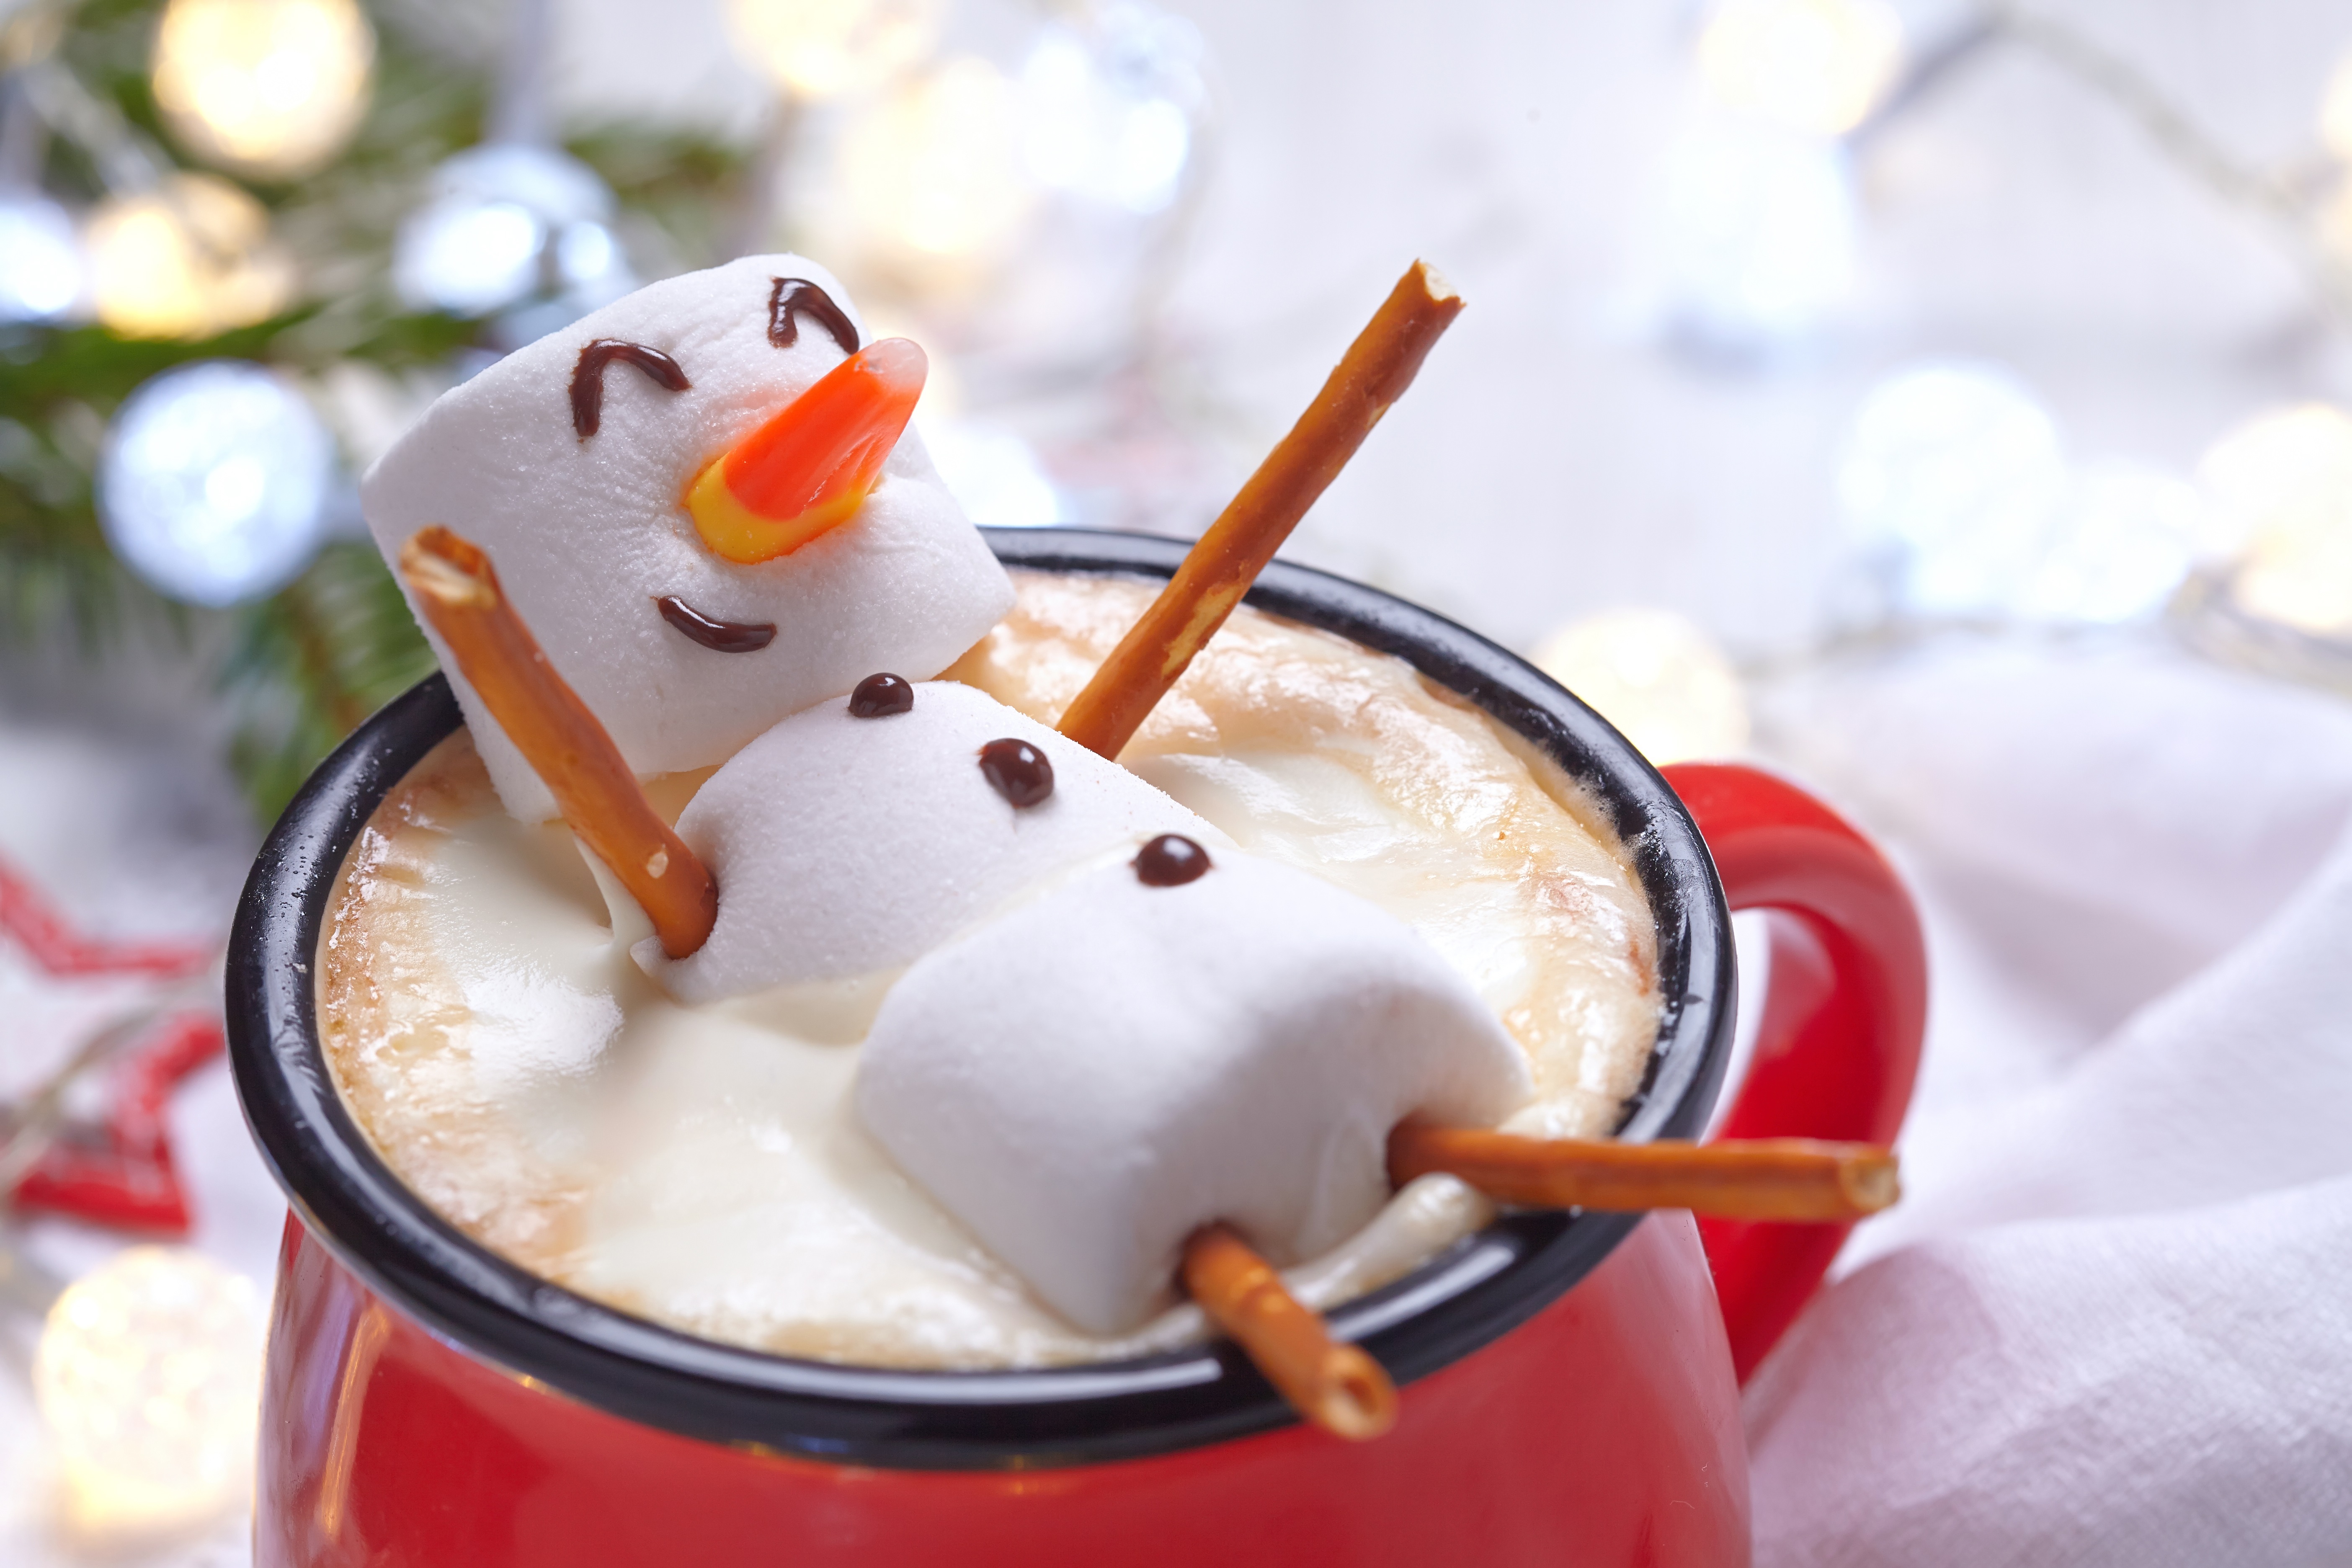 A marshmallow snowman with chocolate eyes, mouth, and buttons, a candy corn nose, and pretzel arms and legs lays in a red mug of hot chocolate at the foreground of an out-of-focus holiday background with lights, a tree, and other seasonal objects.